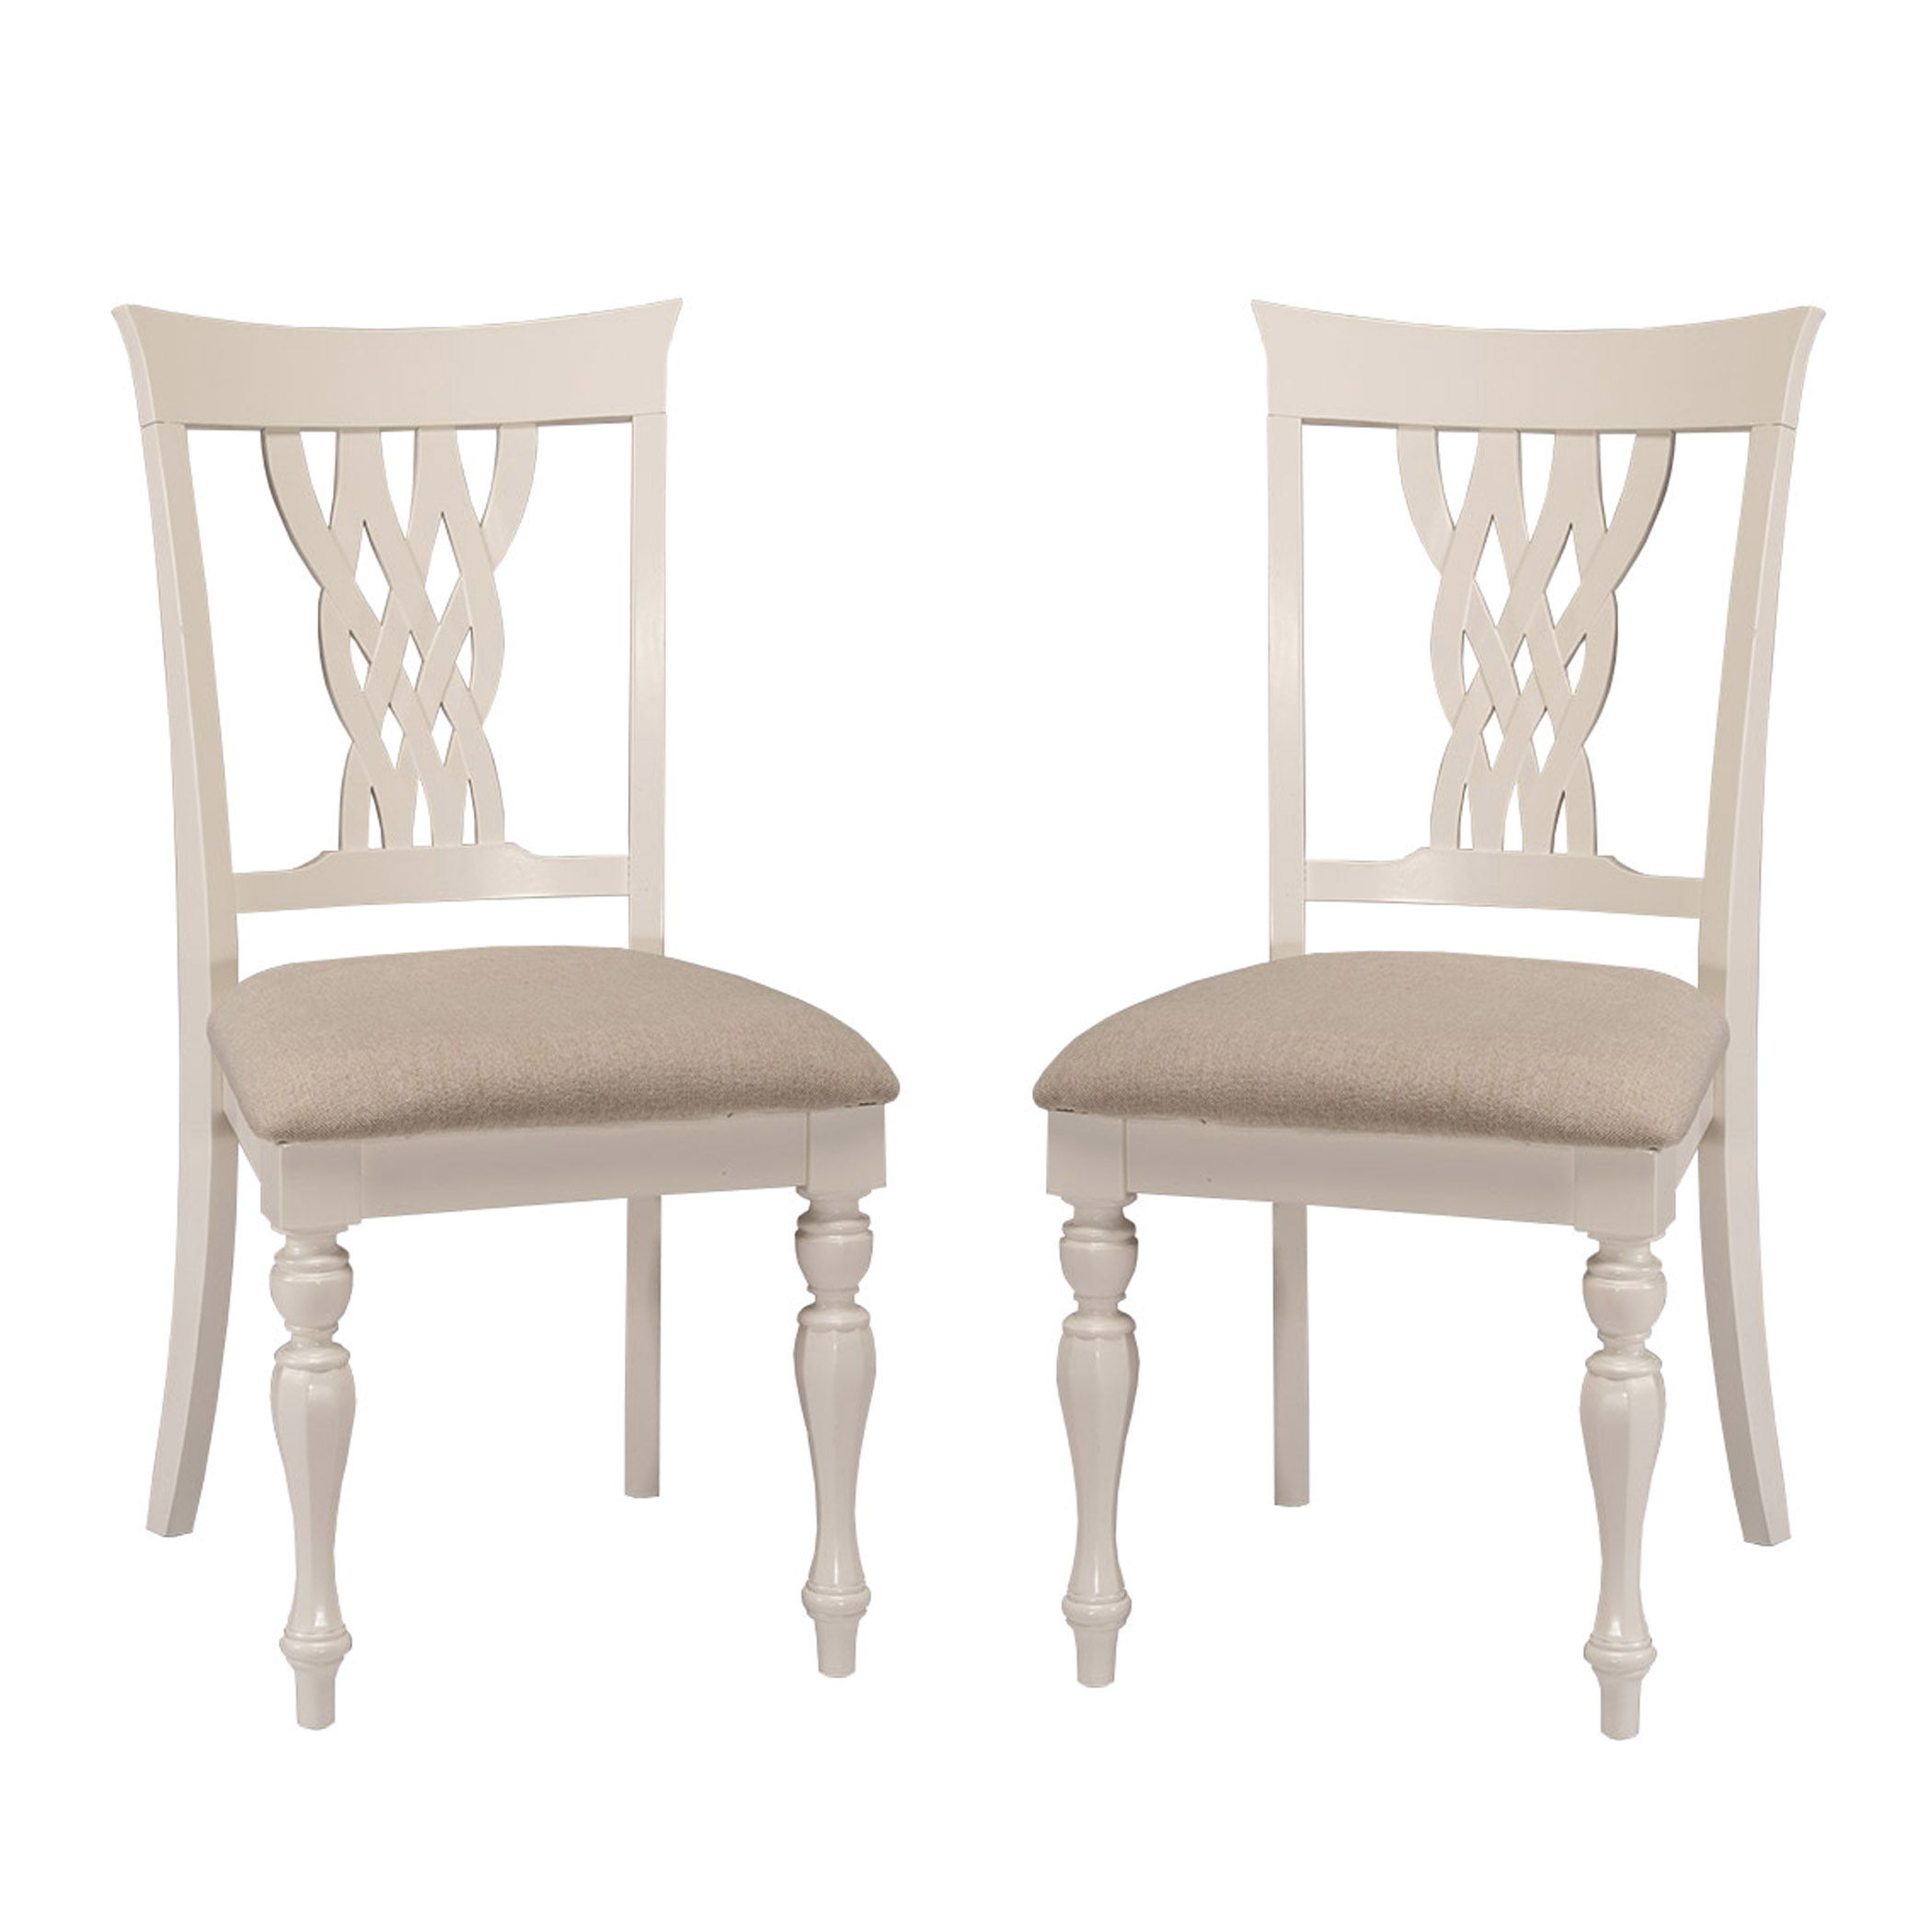 Embassy Wood Dining Chair, Set of 2